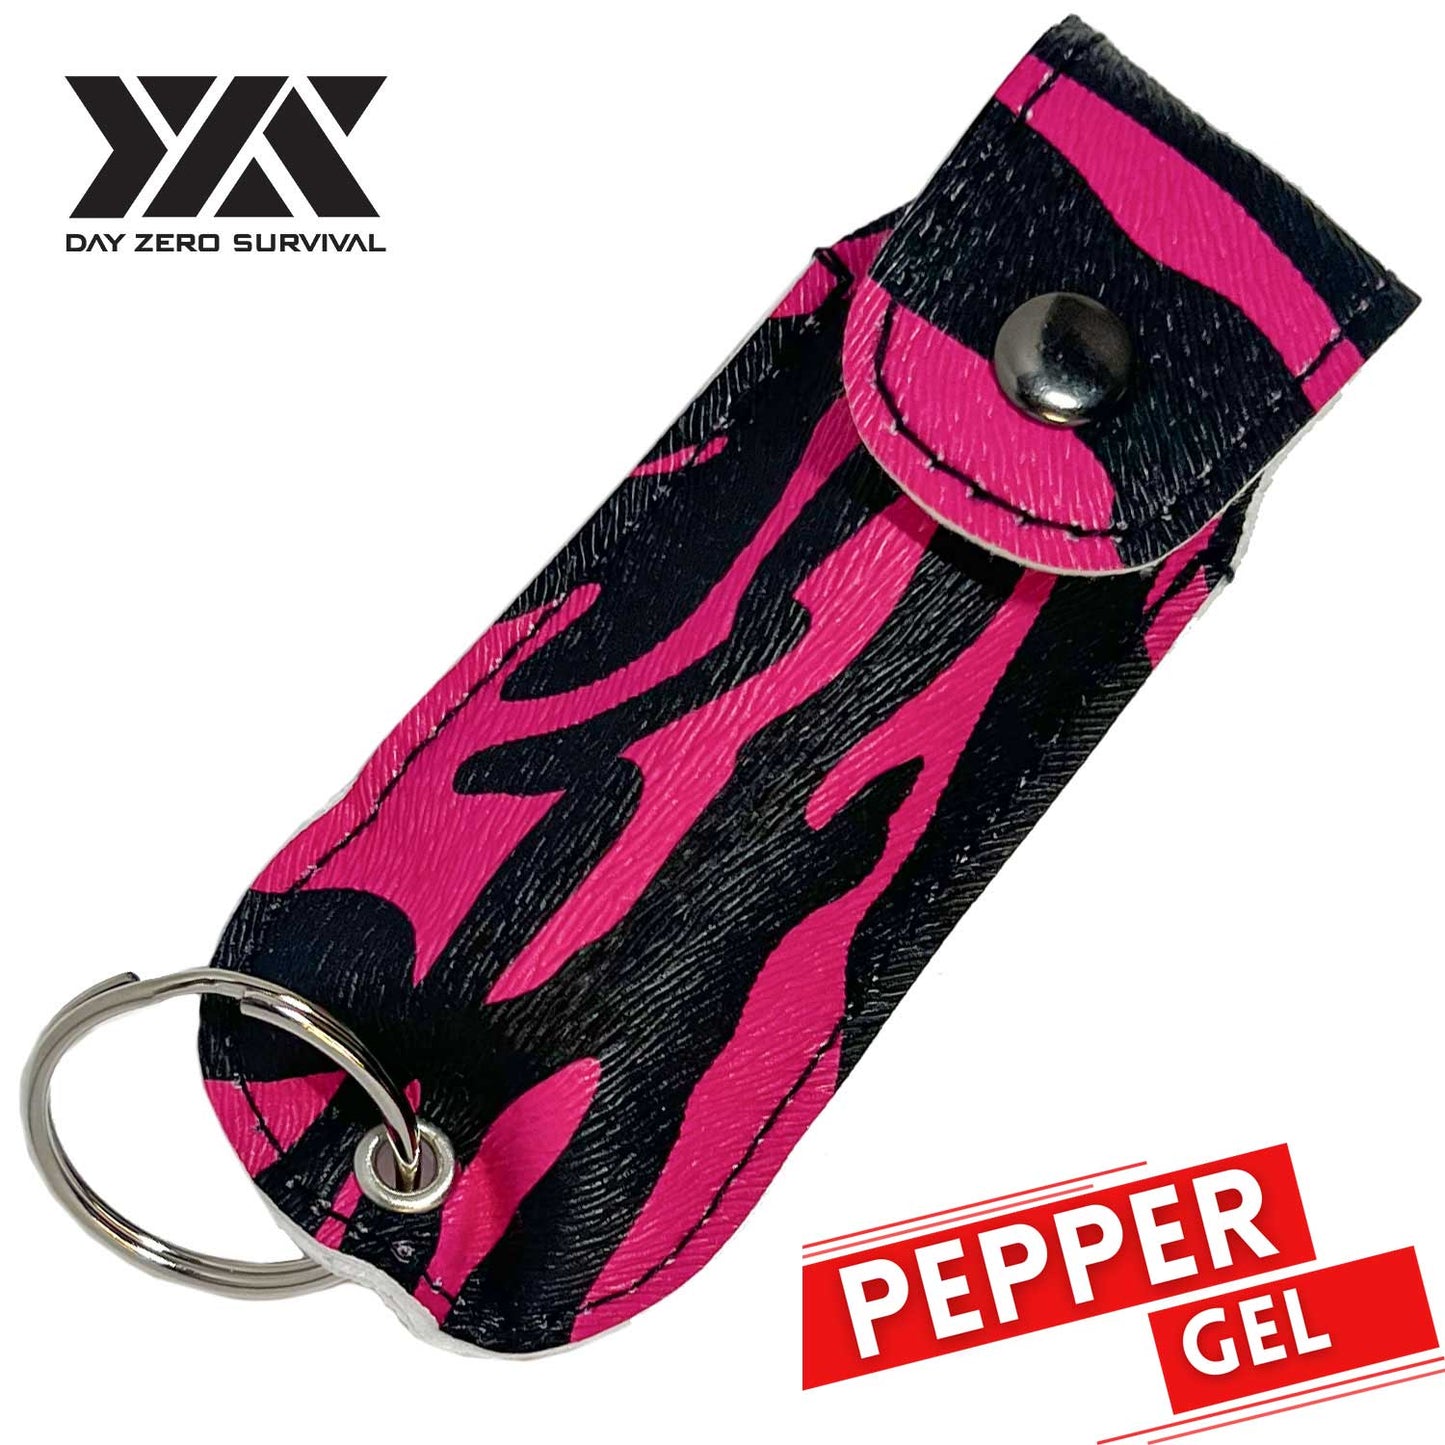 Keychain Pepper Gel with Case